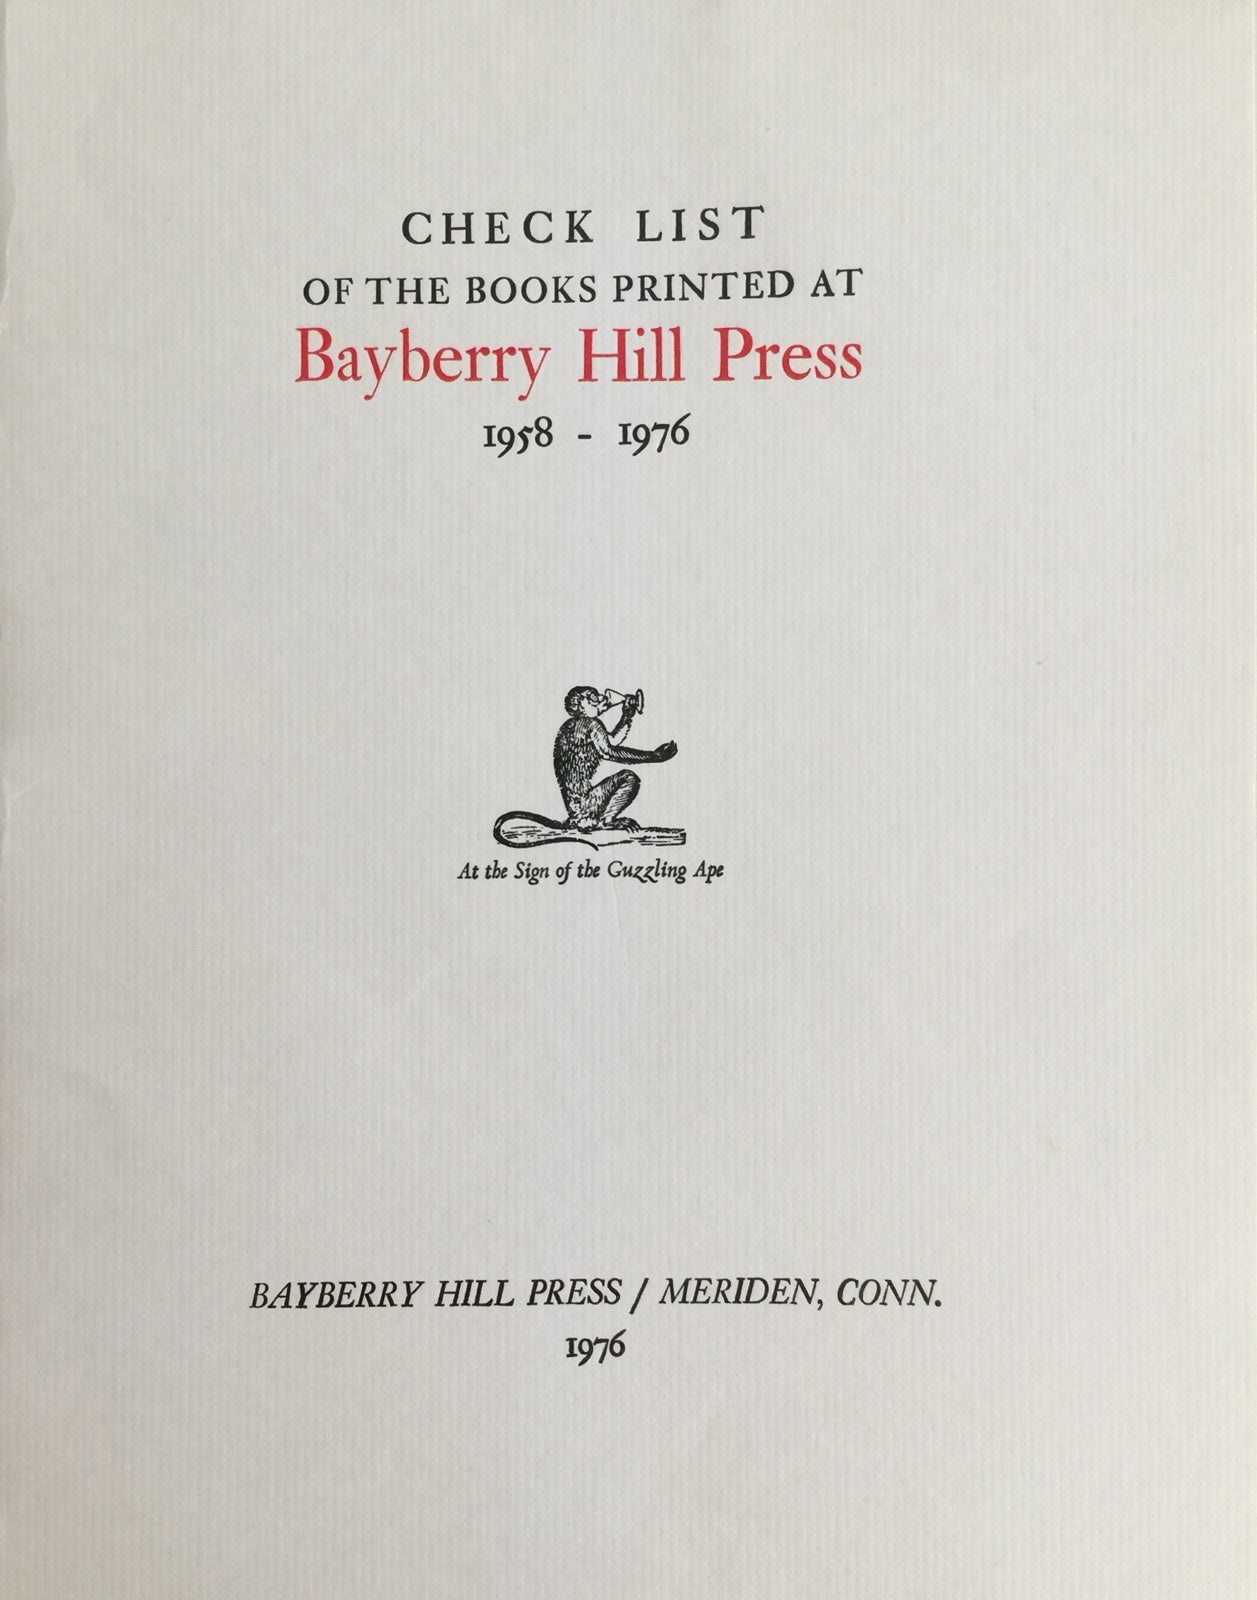 A Bibliography of the Books printed at Bayberry Hill Press 1958-1968.